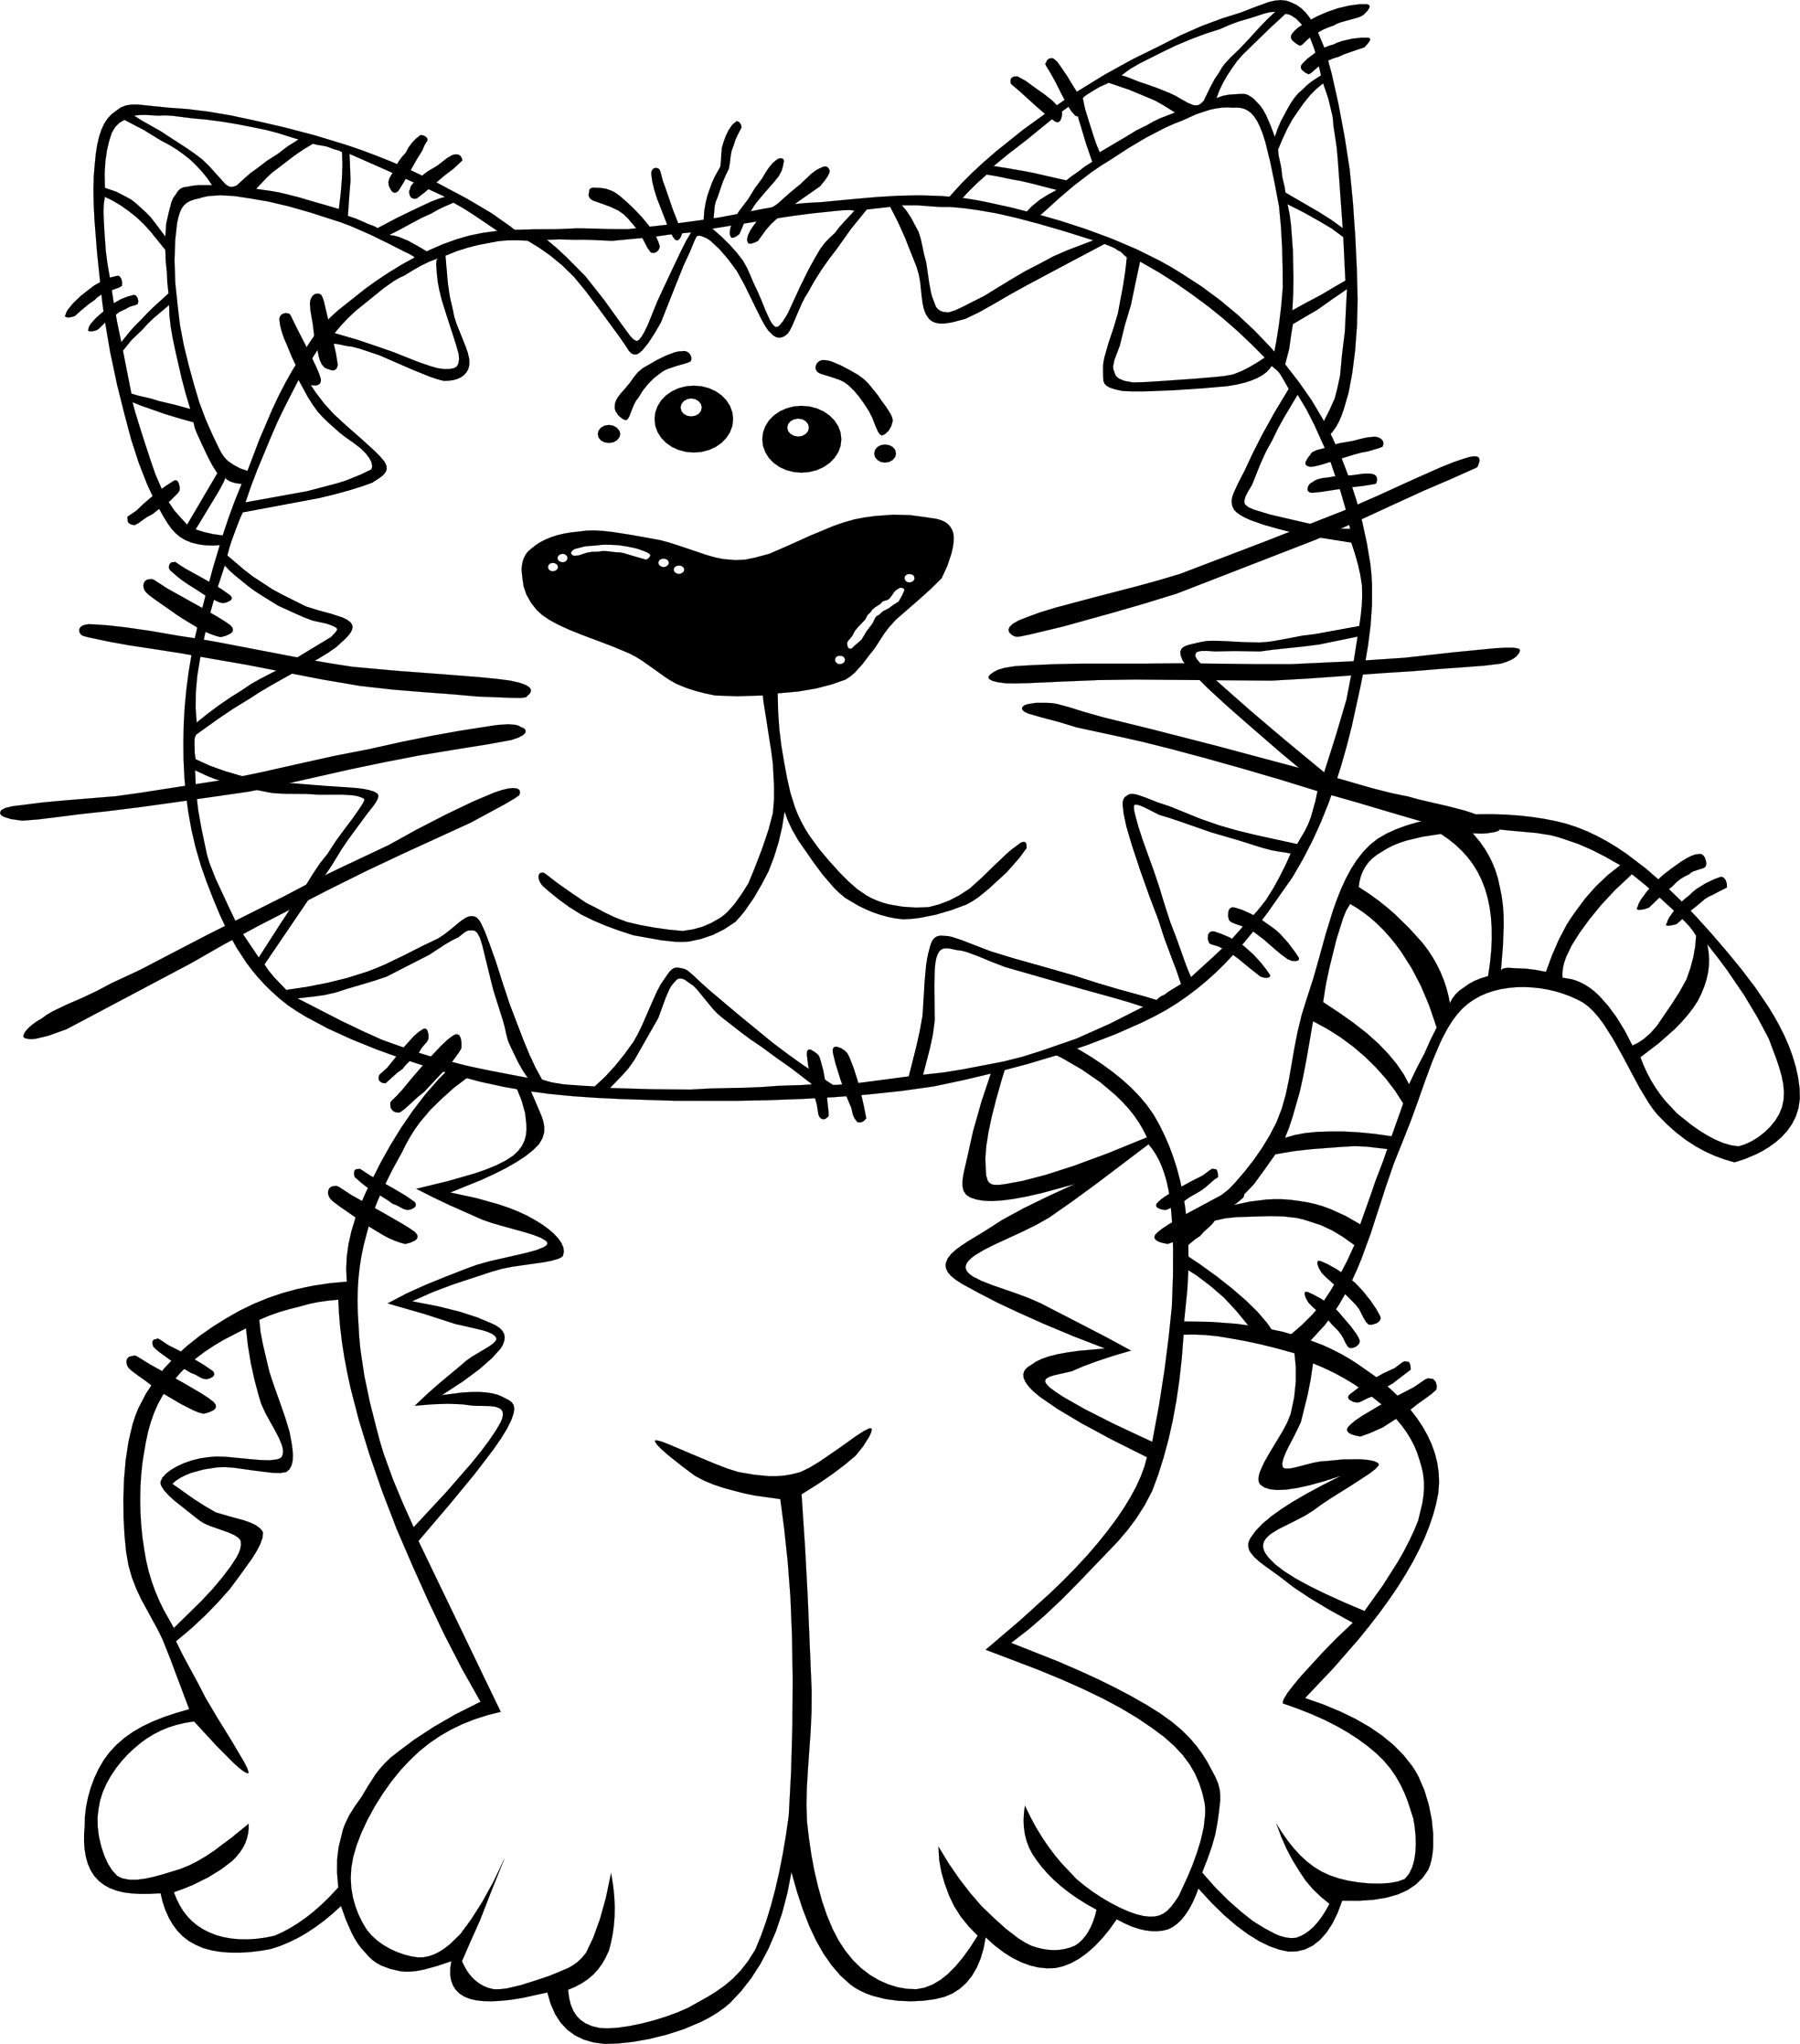 Line Drawing Of Cat - ClipArt Best